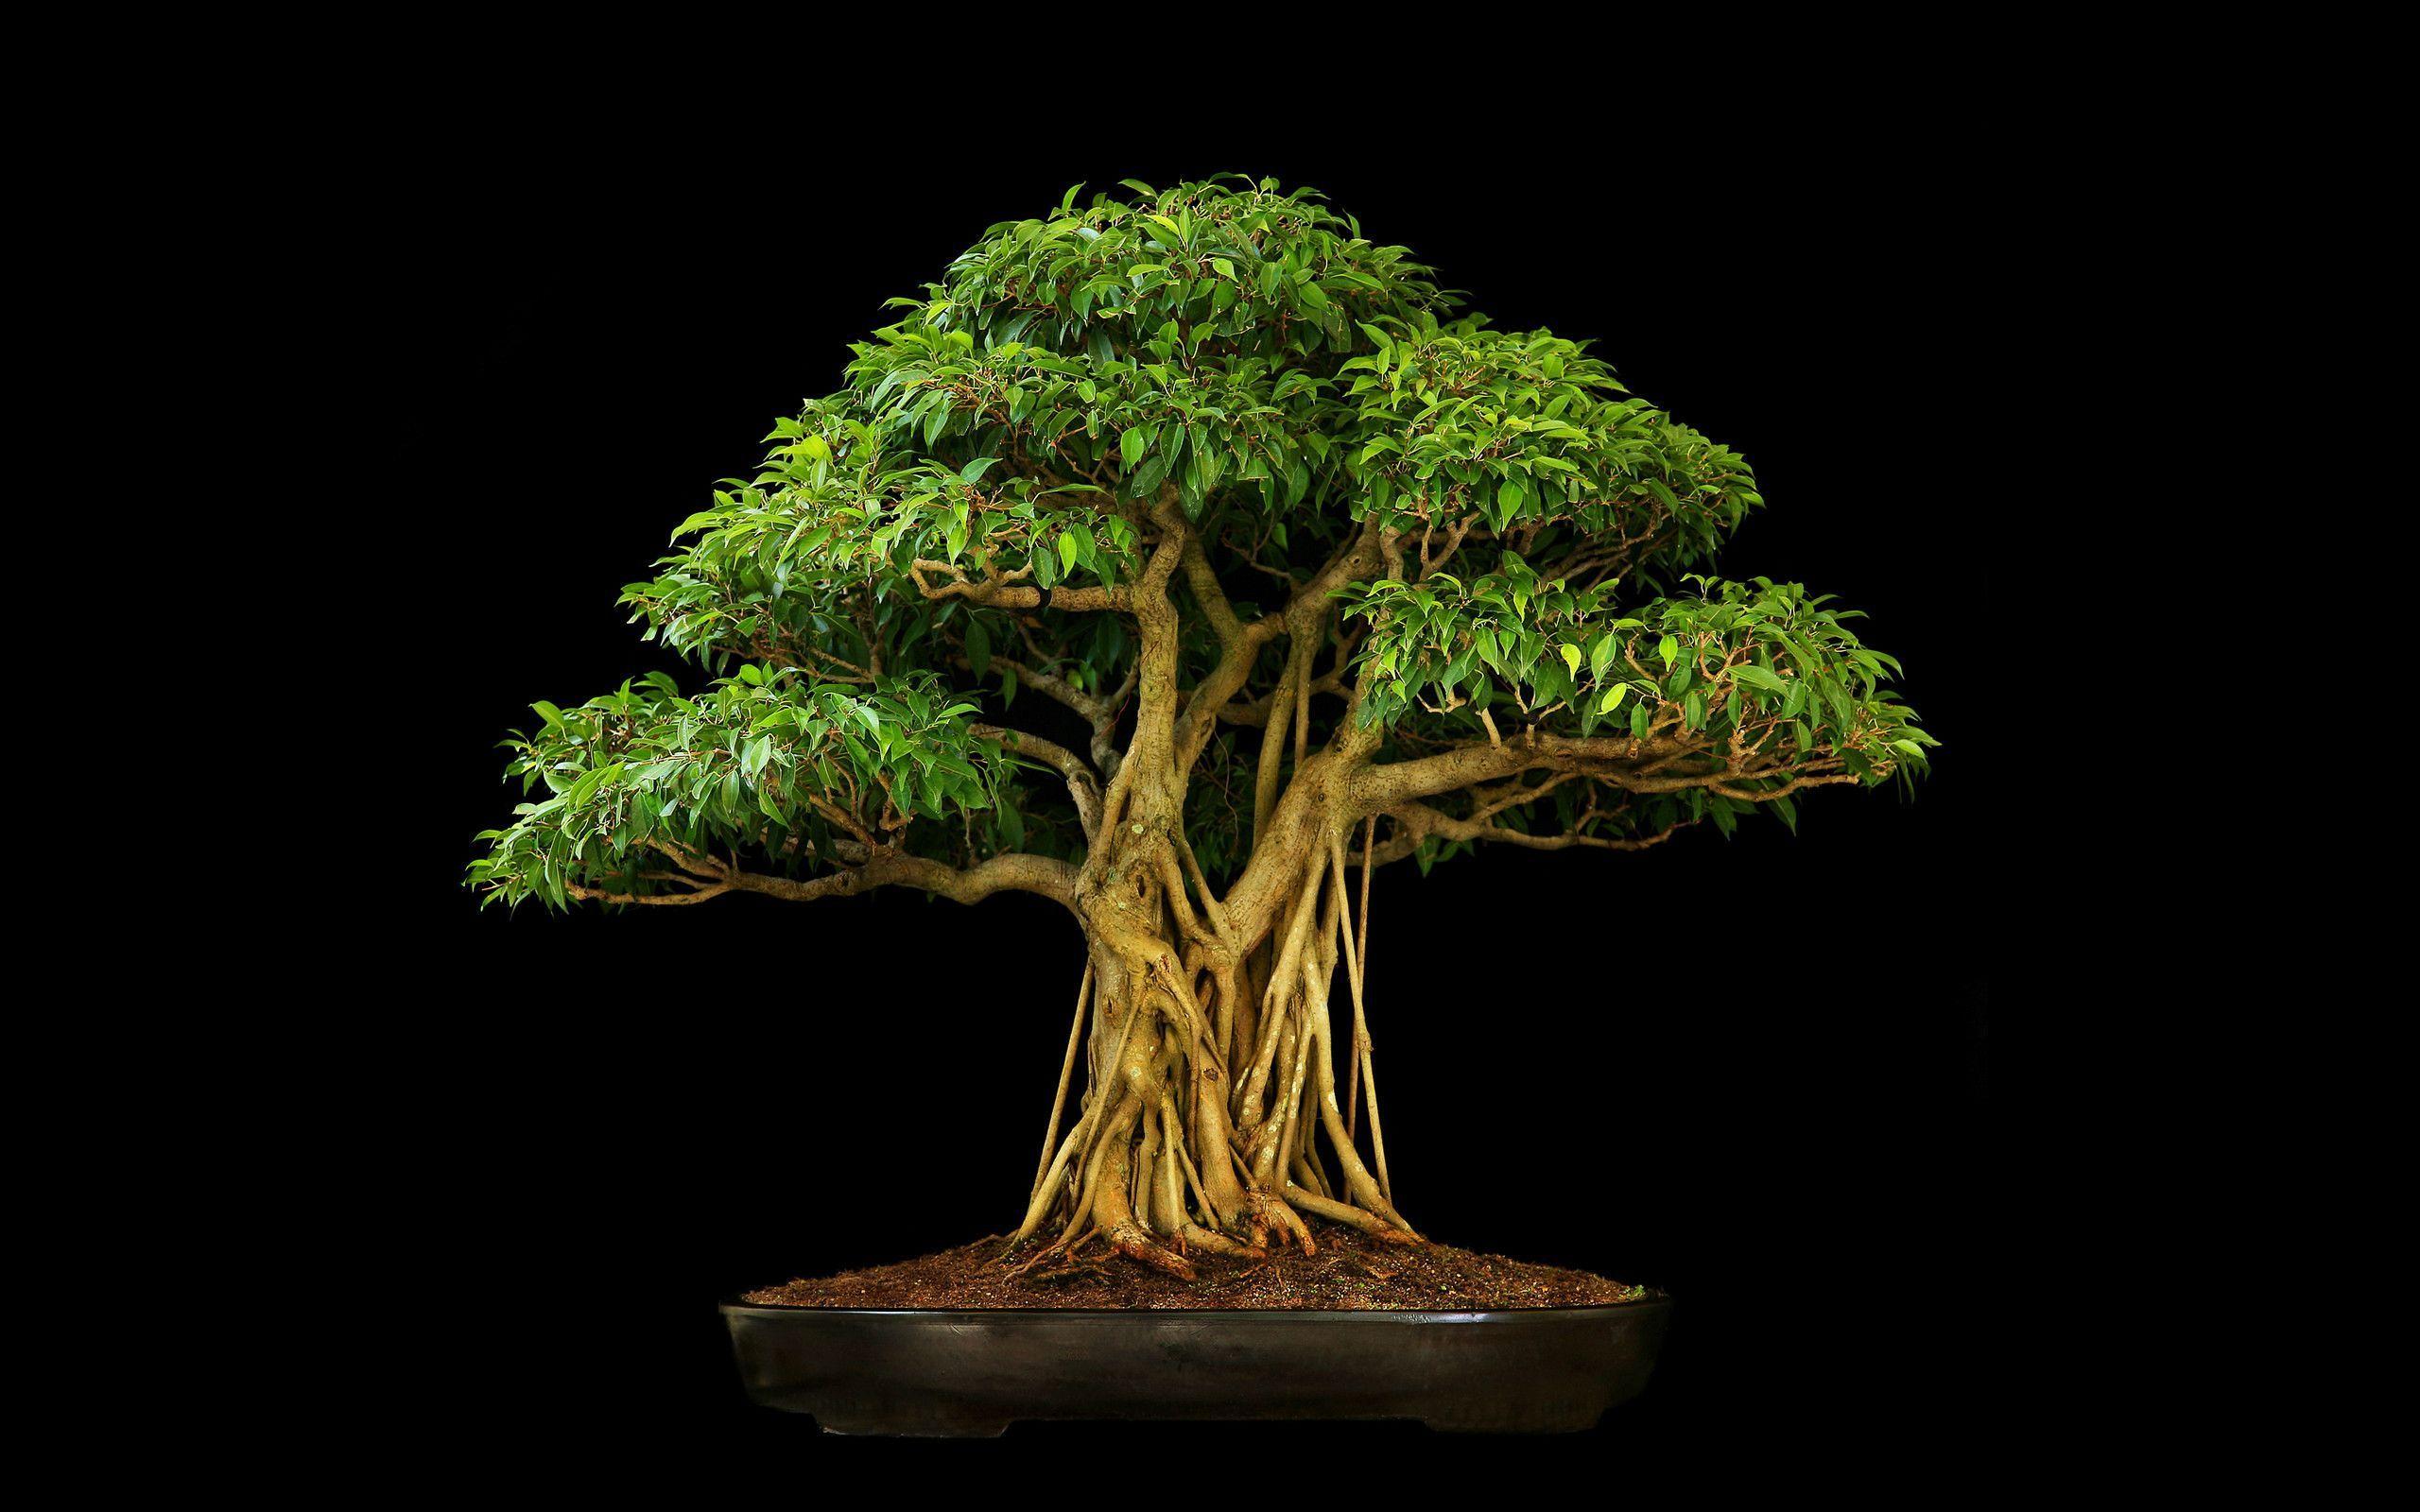 Amazing Bonsai Tree Background of the decade Check it out now 